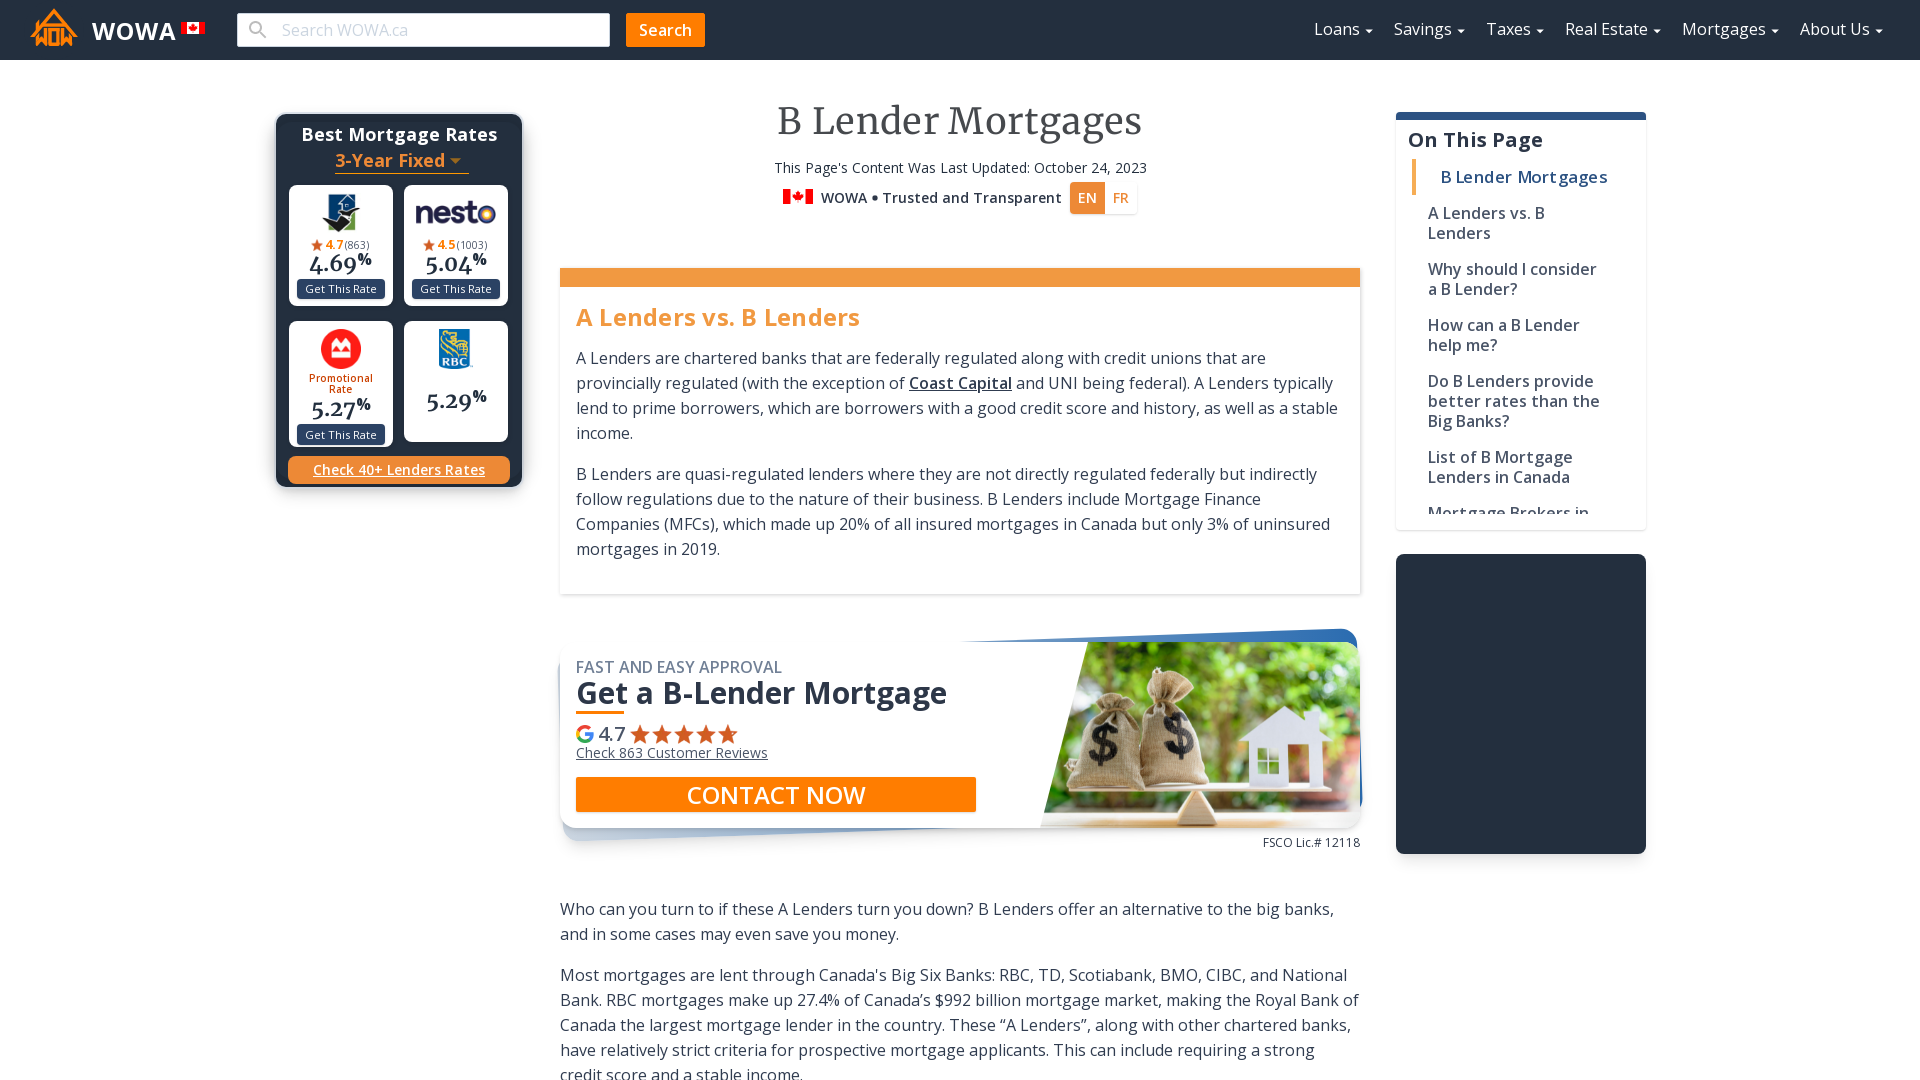 B Lender Mortgages Canada | All You Need to Know | WOWA.ca